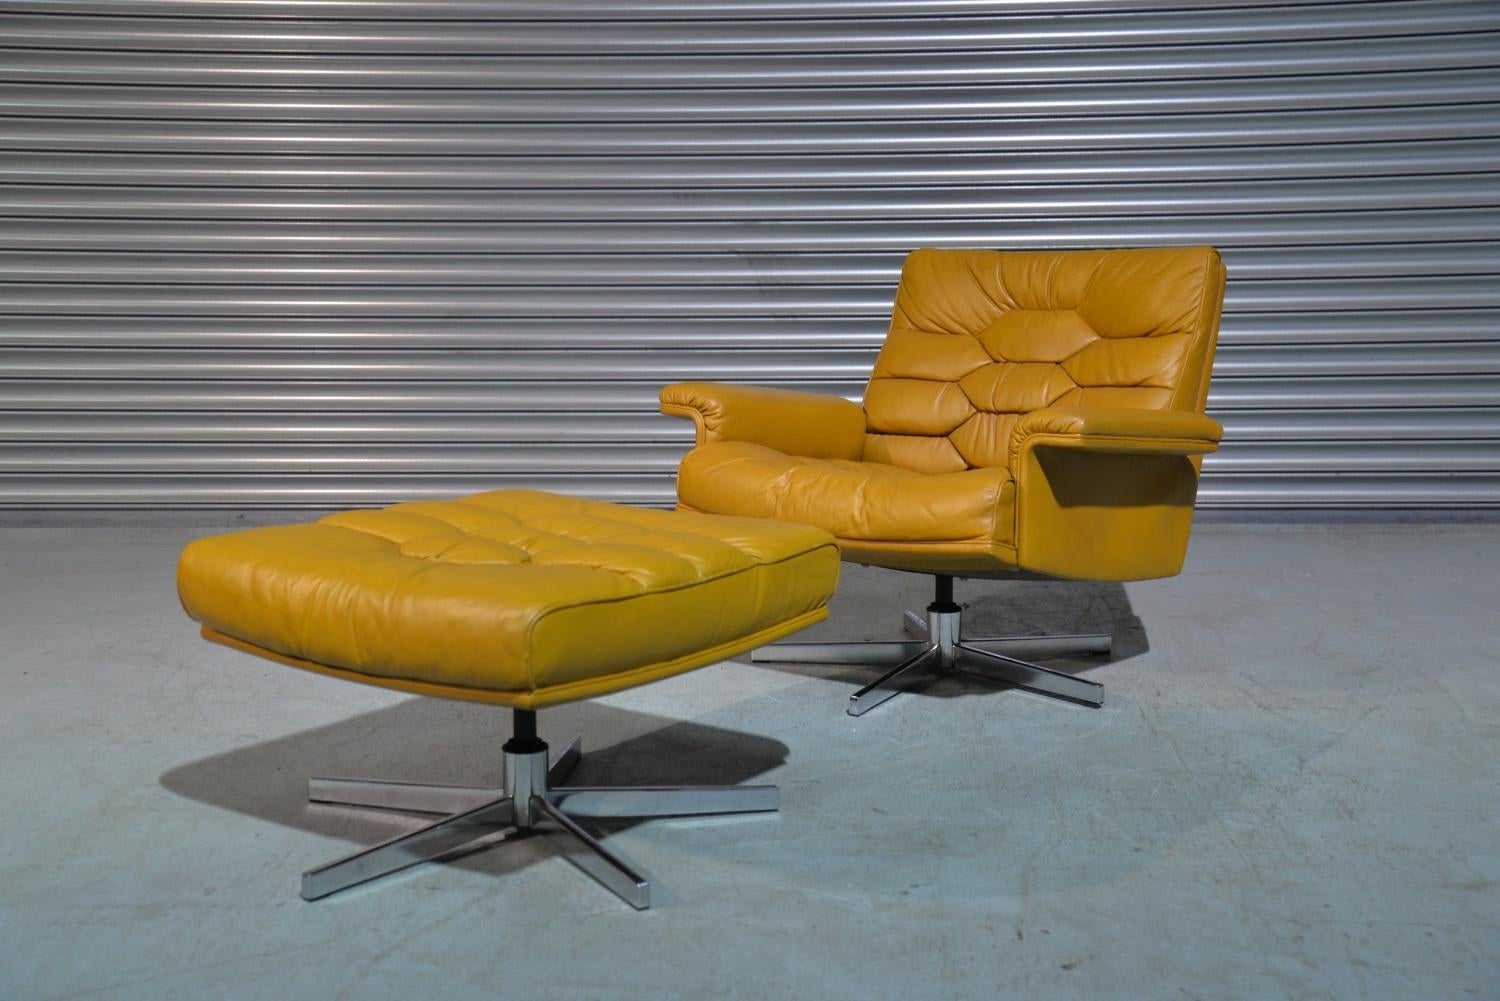 Discounted airfreight for our US and International customers ( from 2 weeks door to door) 

We are delighted to bring to you an ultra-rare and highly desirable de Sede Executive swivel lounge armchair and ottoman. Built in the 1970s by de Sede